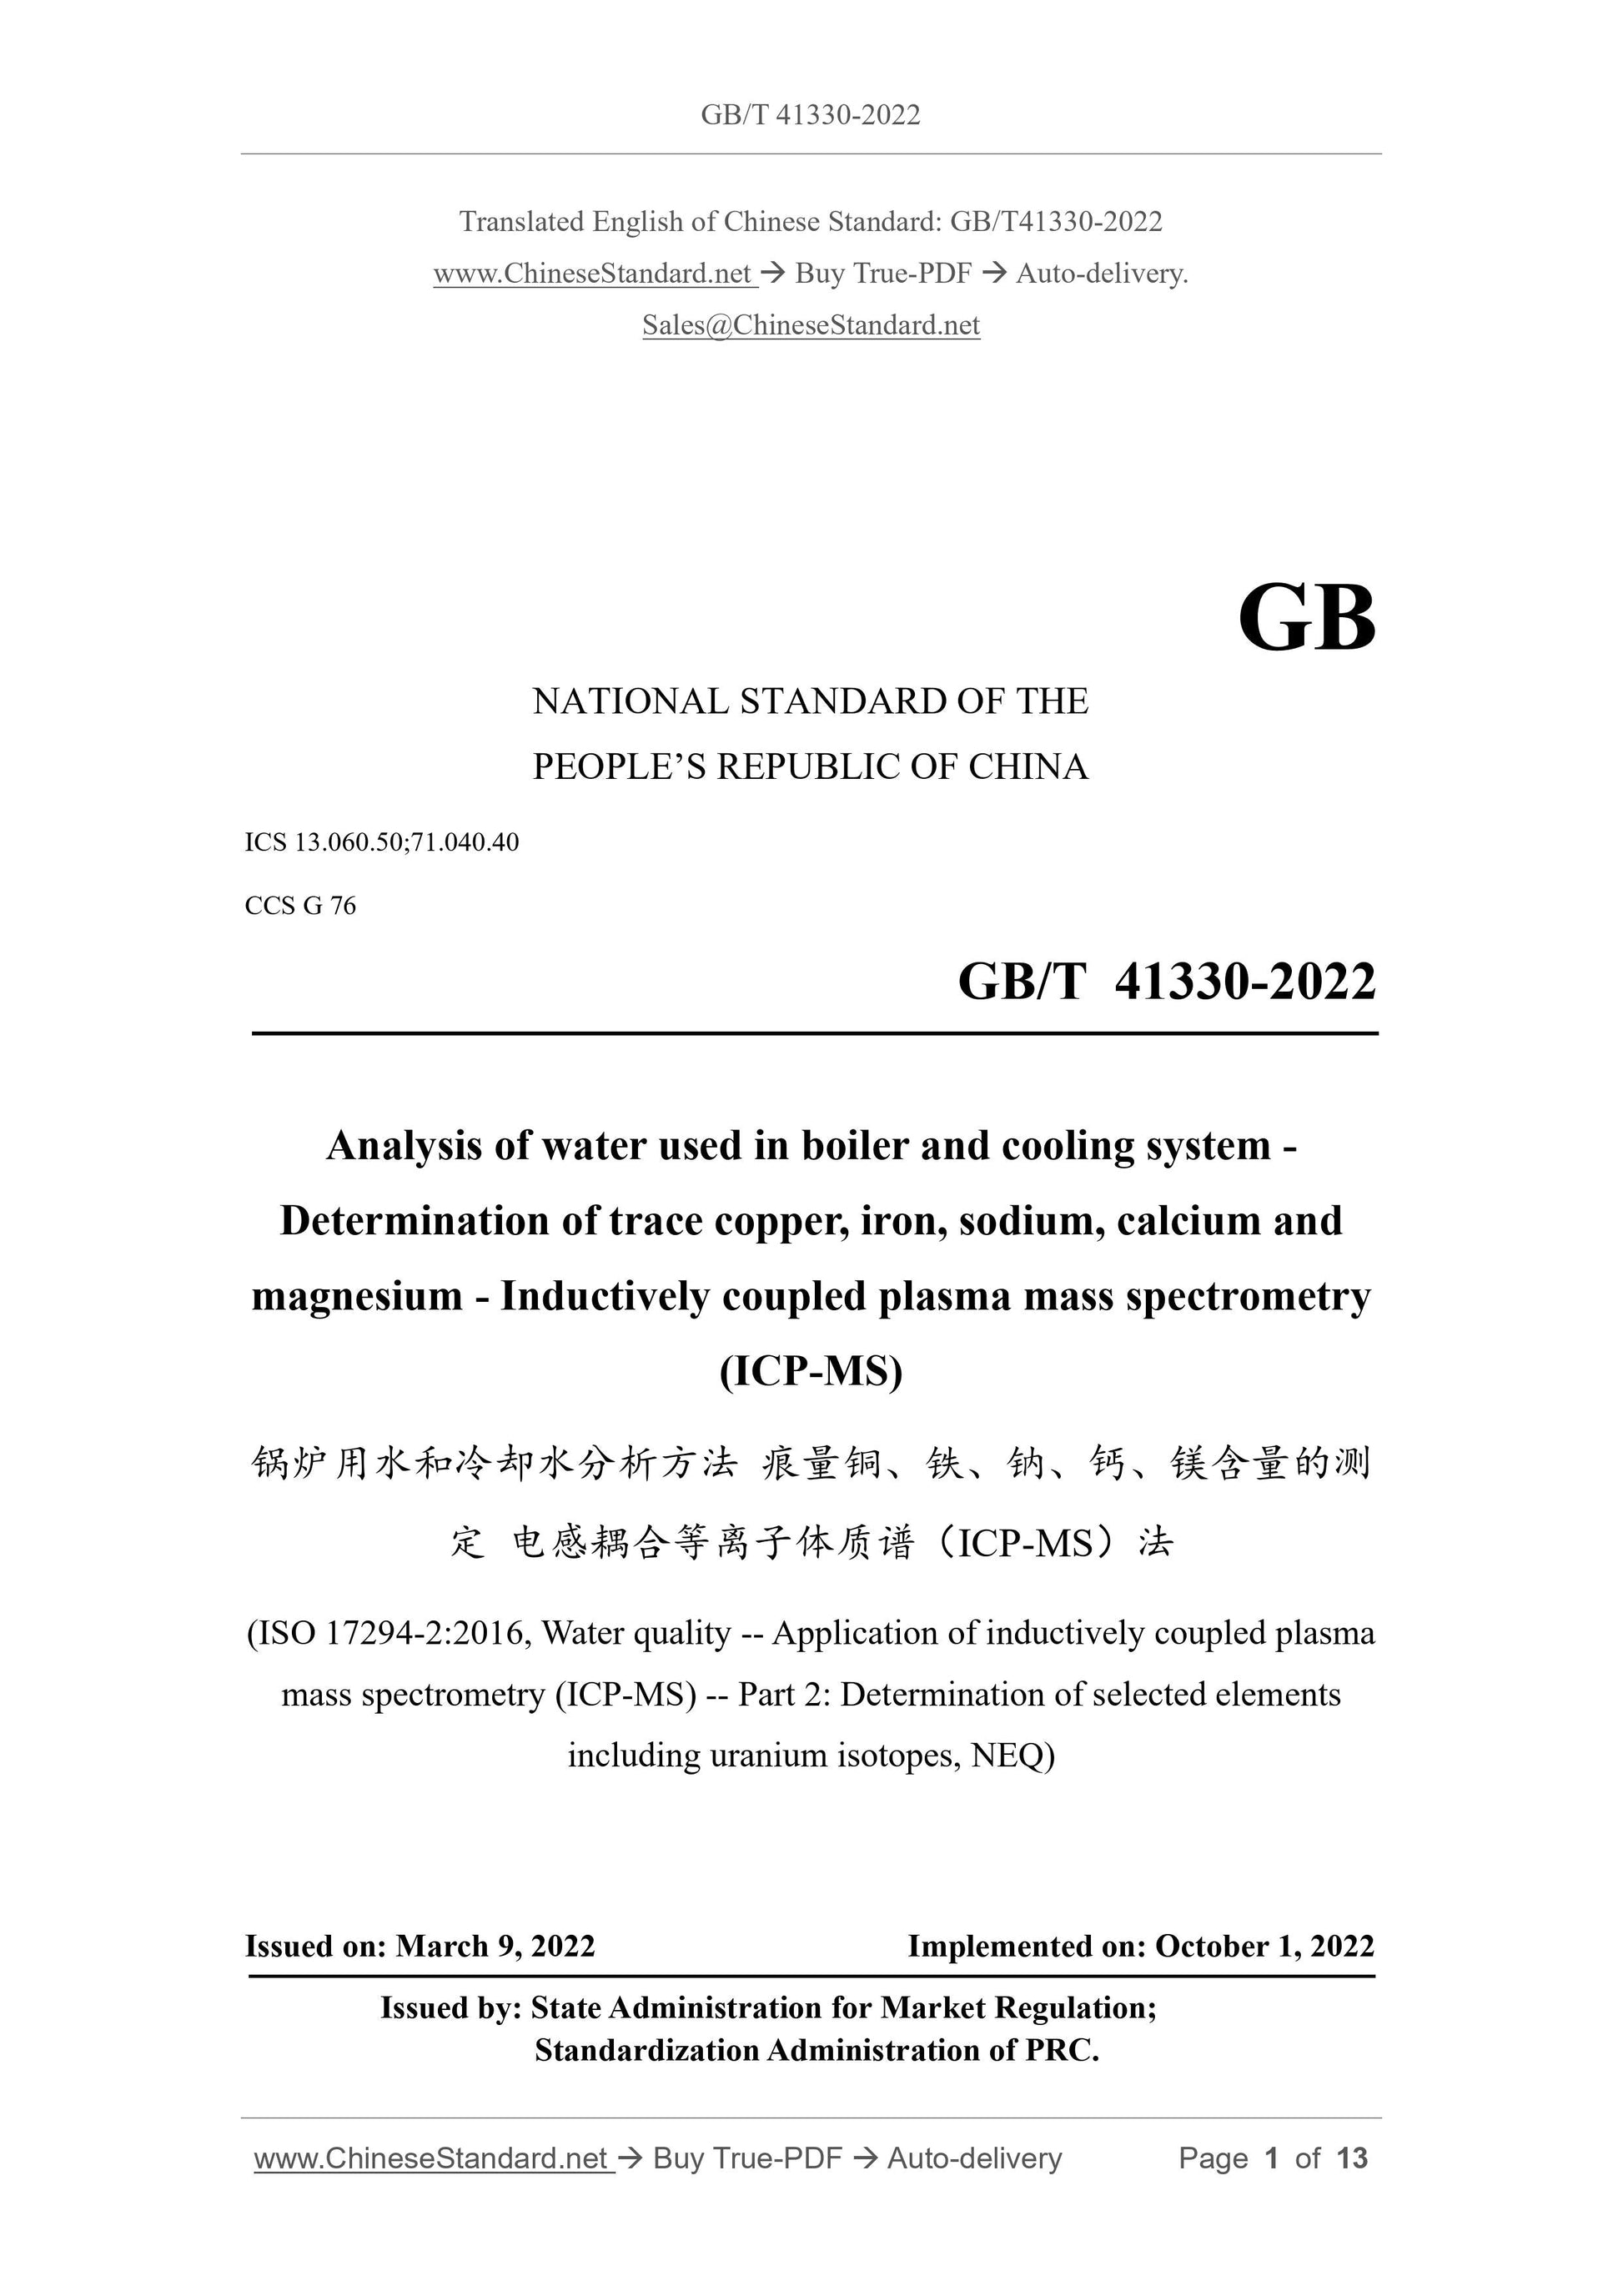 GB/T 41330-2022 Page 1